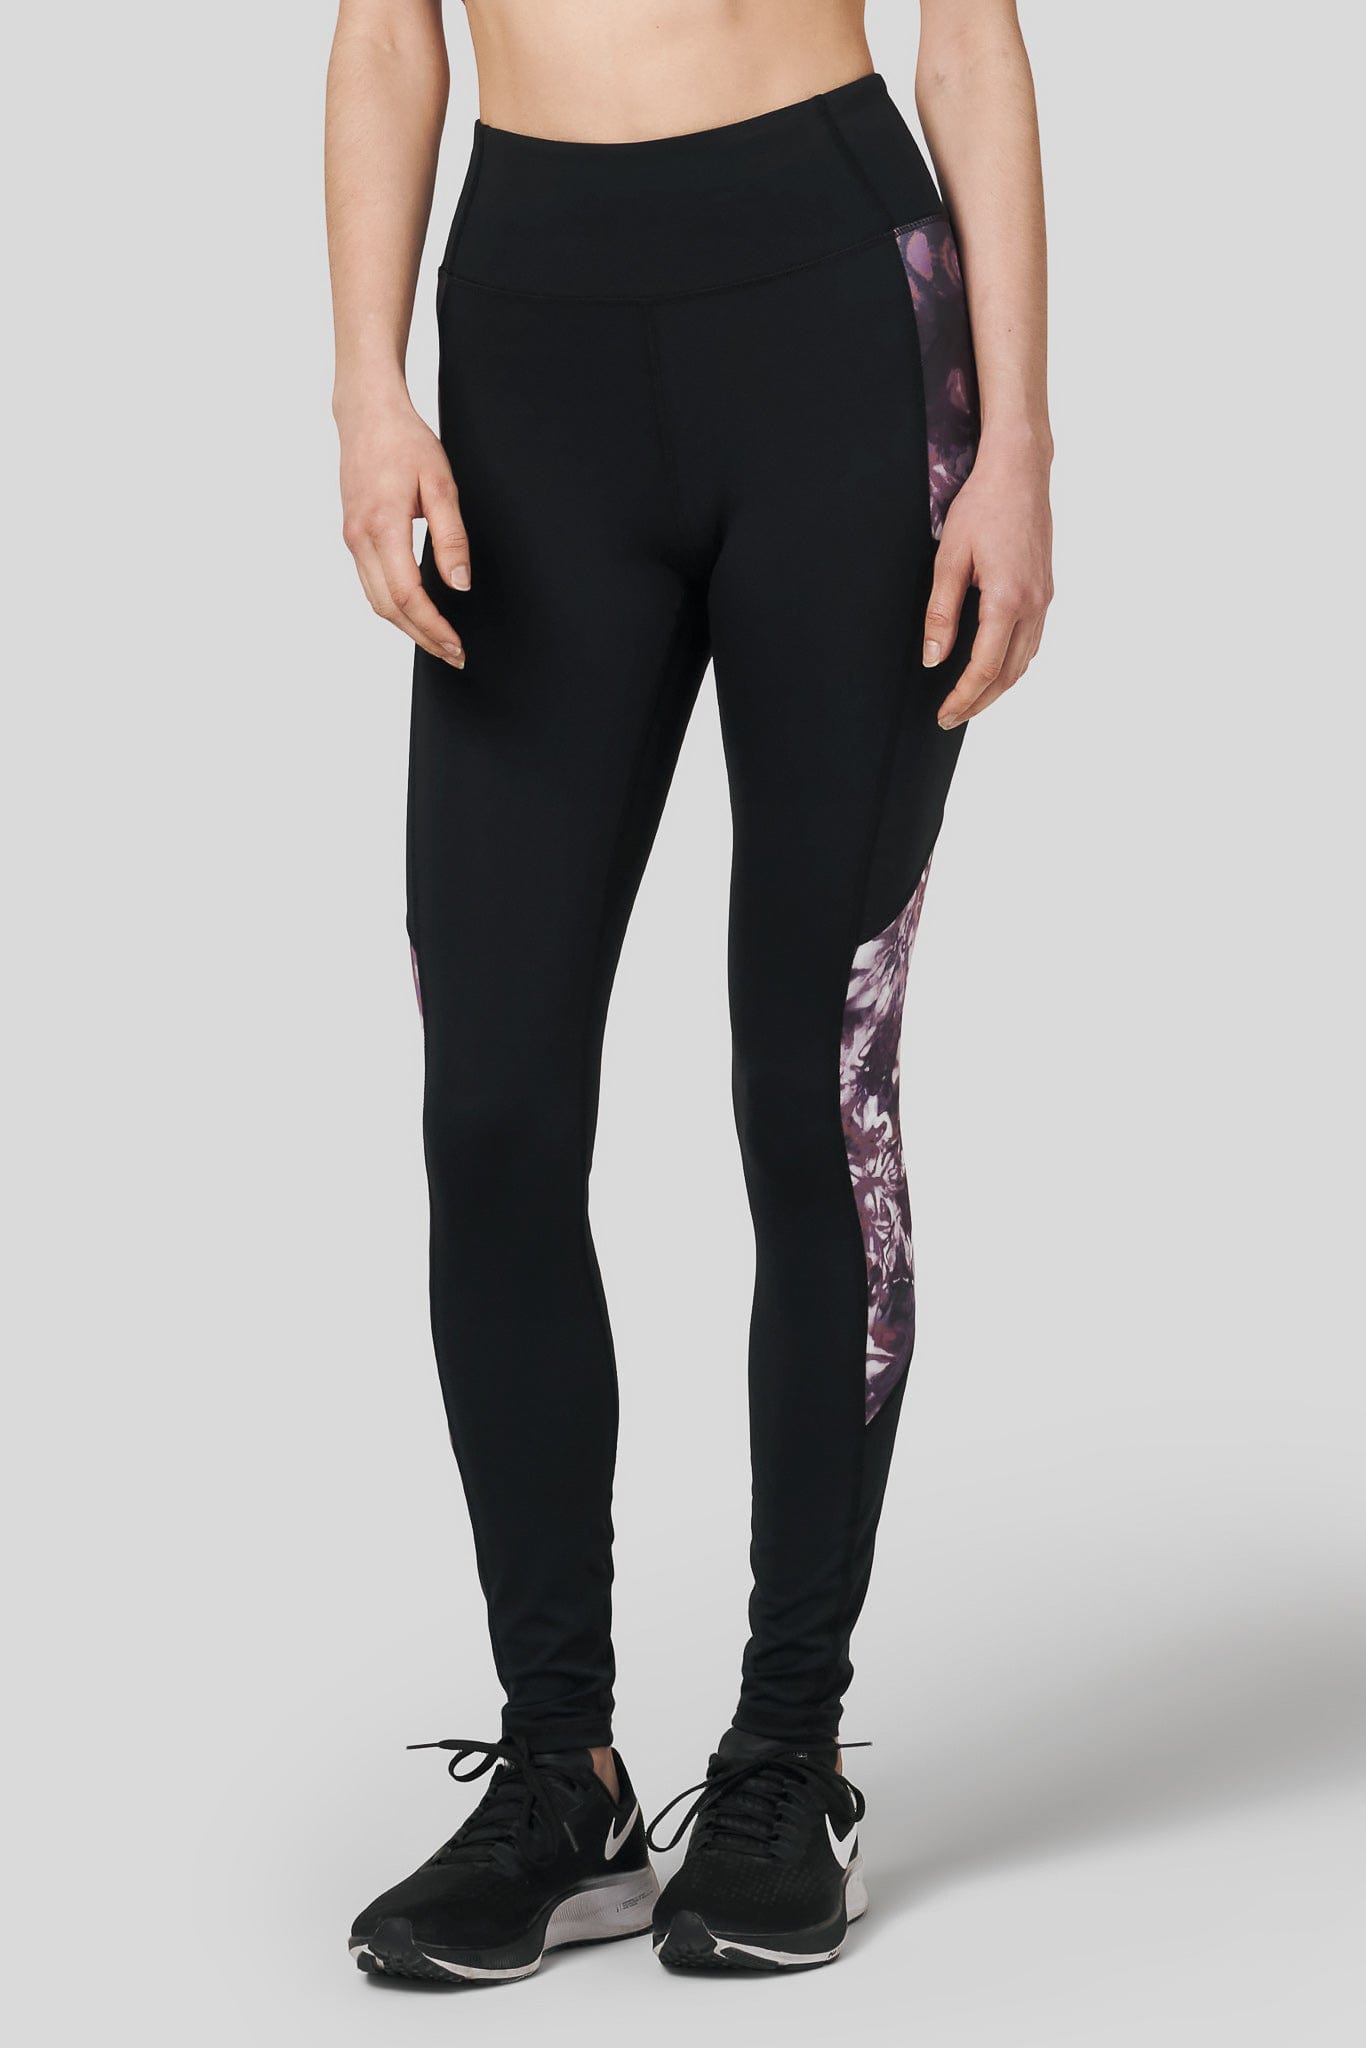 A woman models a black legging with tie dye print and wears nike metcons.